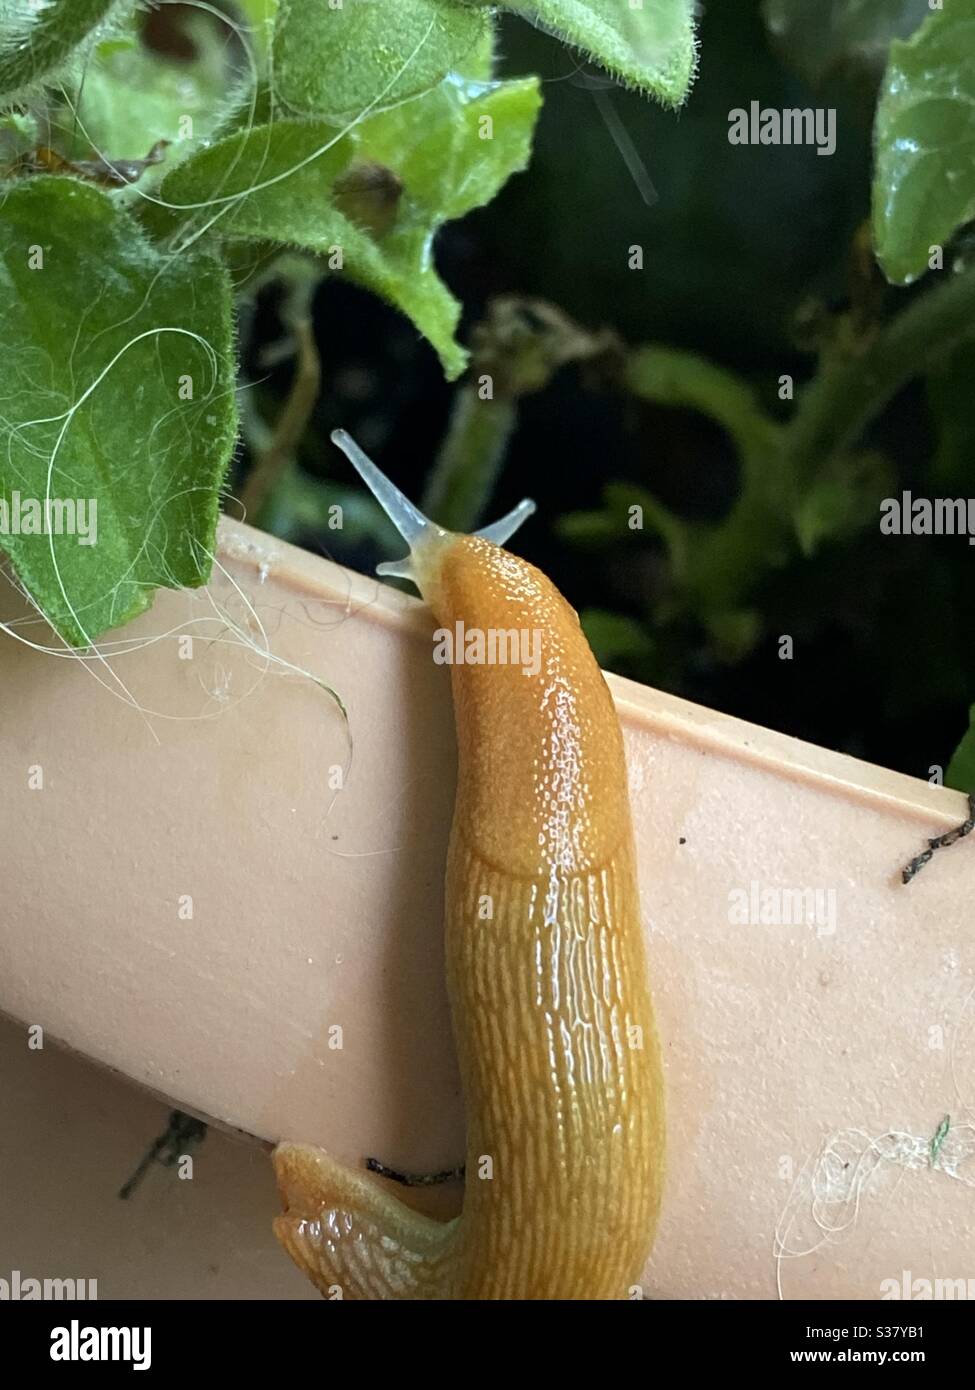 Slimy snail on flower pot with antennae Stock Photo